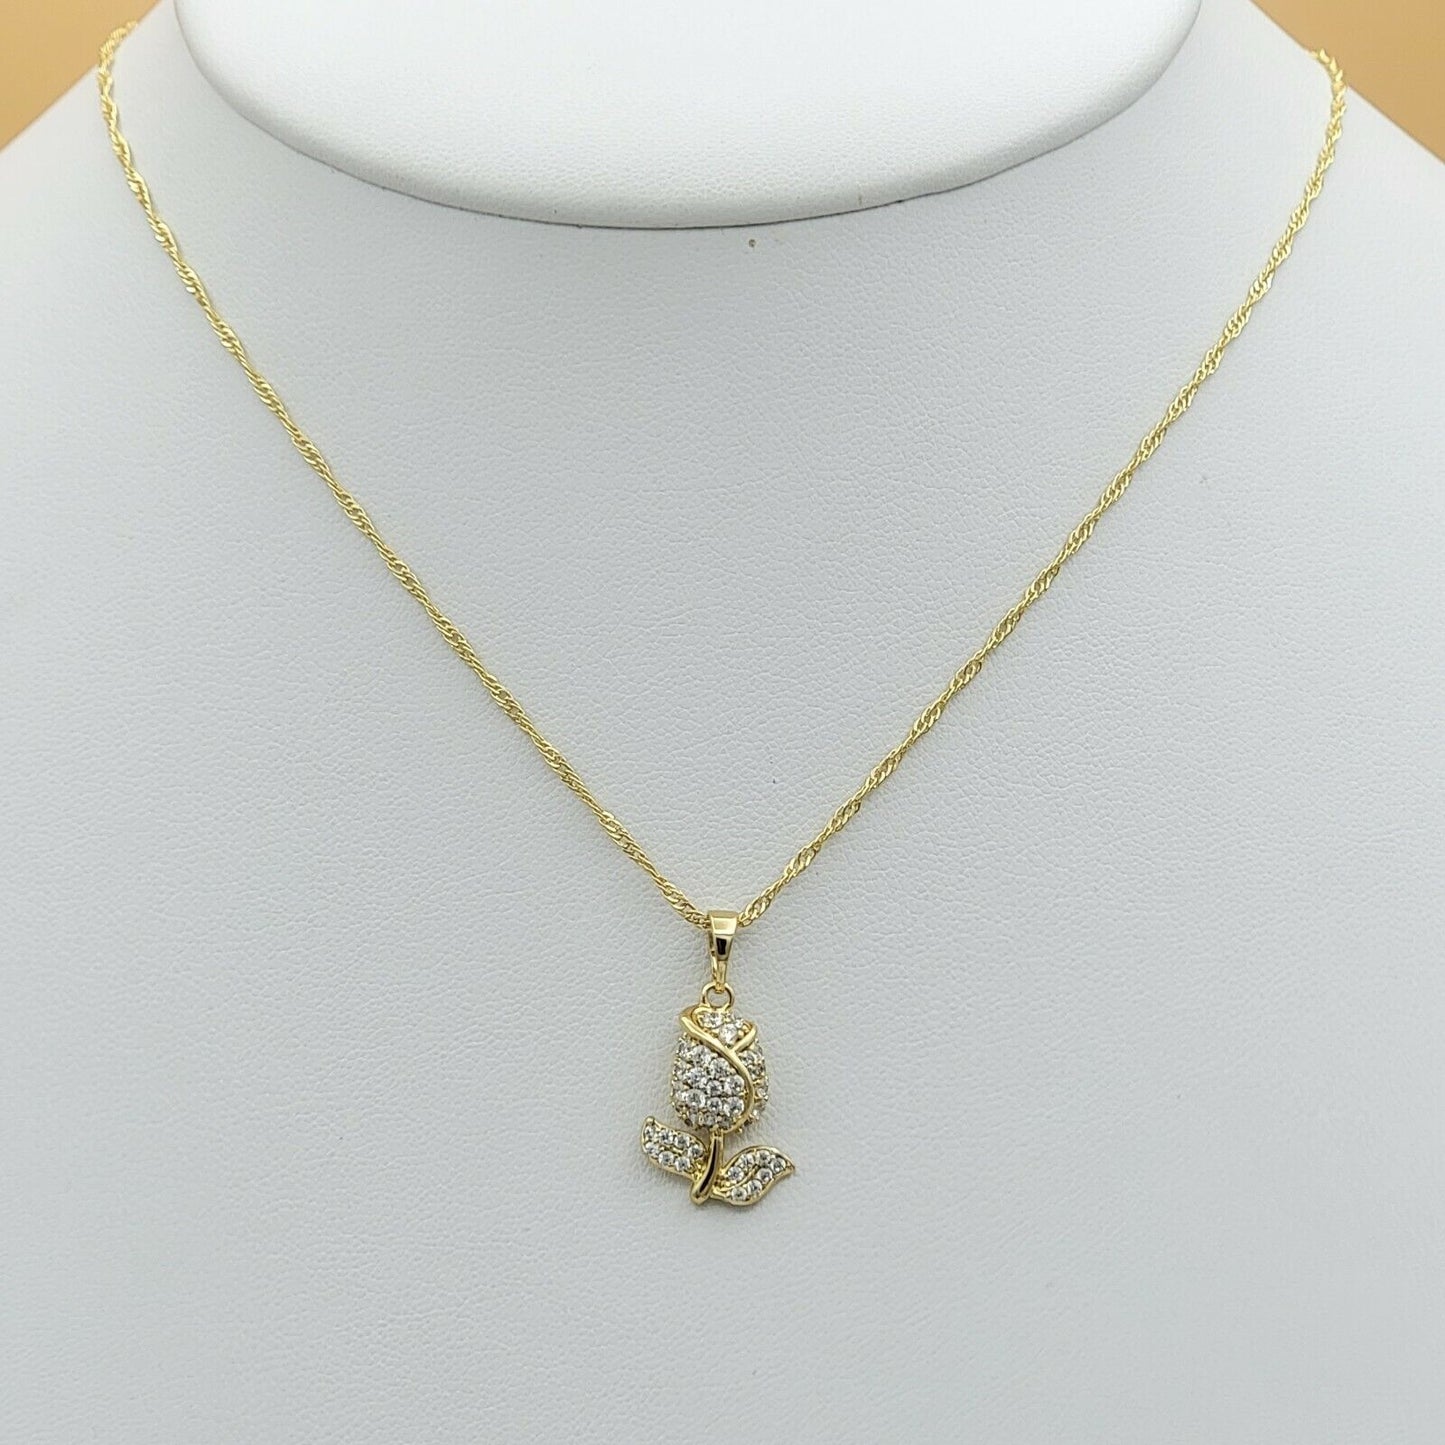 Necklaces - 14K Gold Plated. Icy Rose Flower Pendant & Chain.